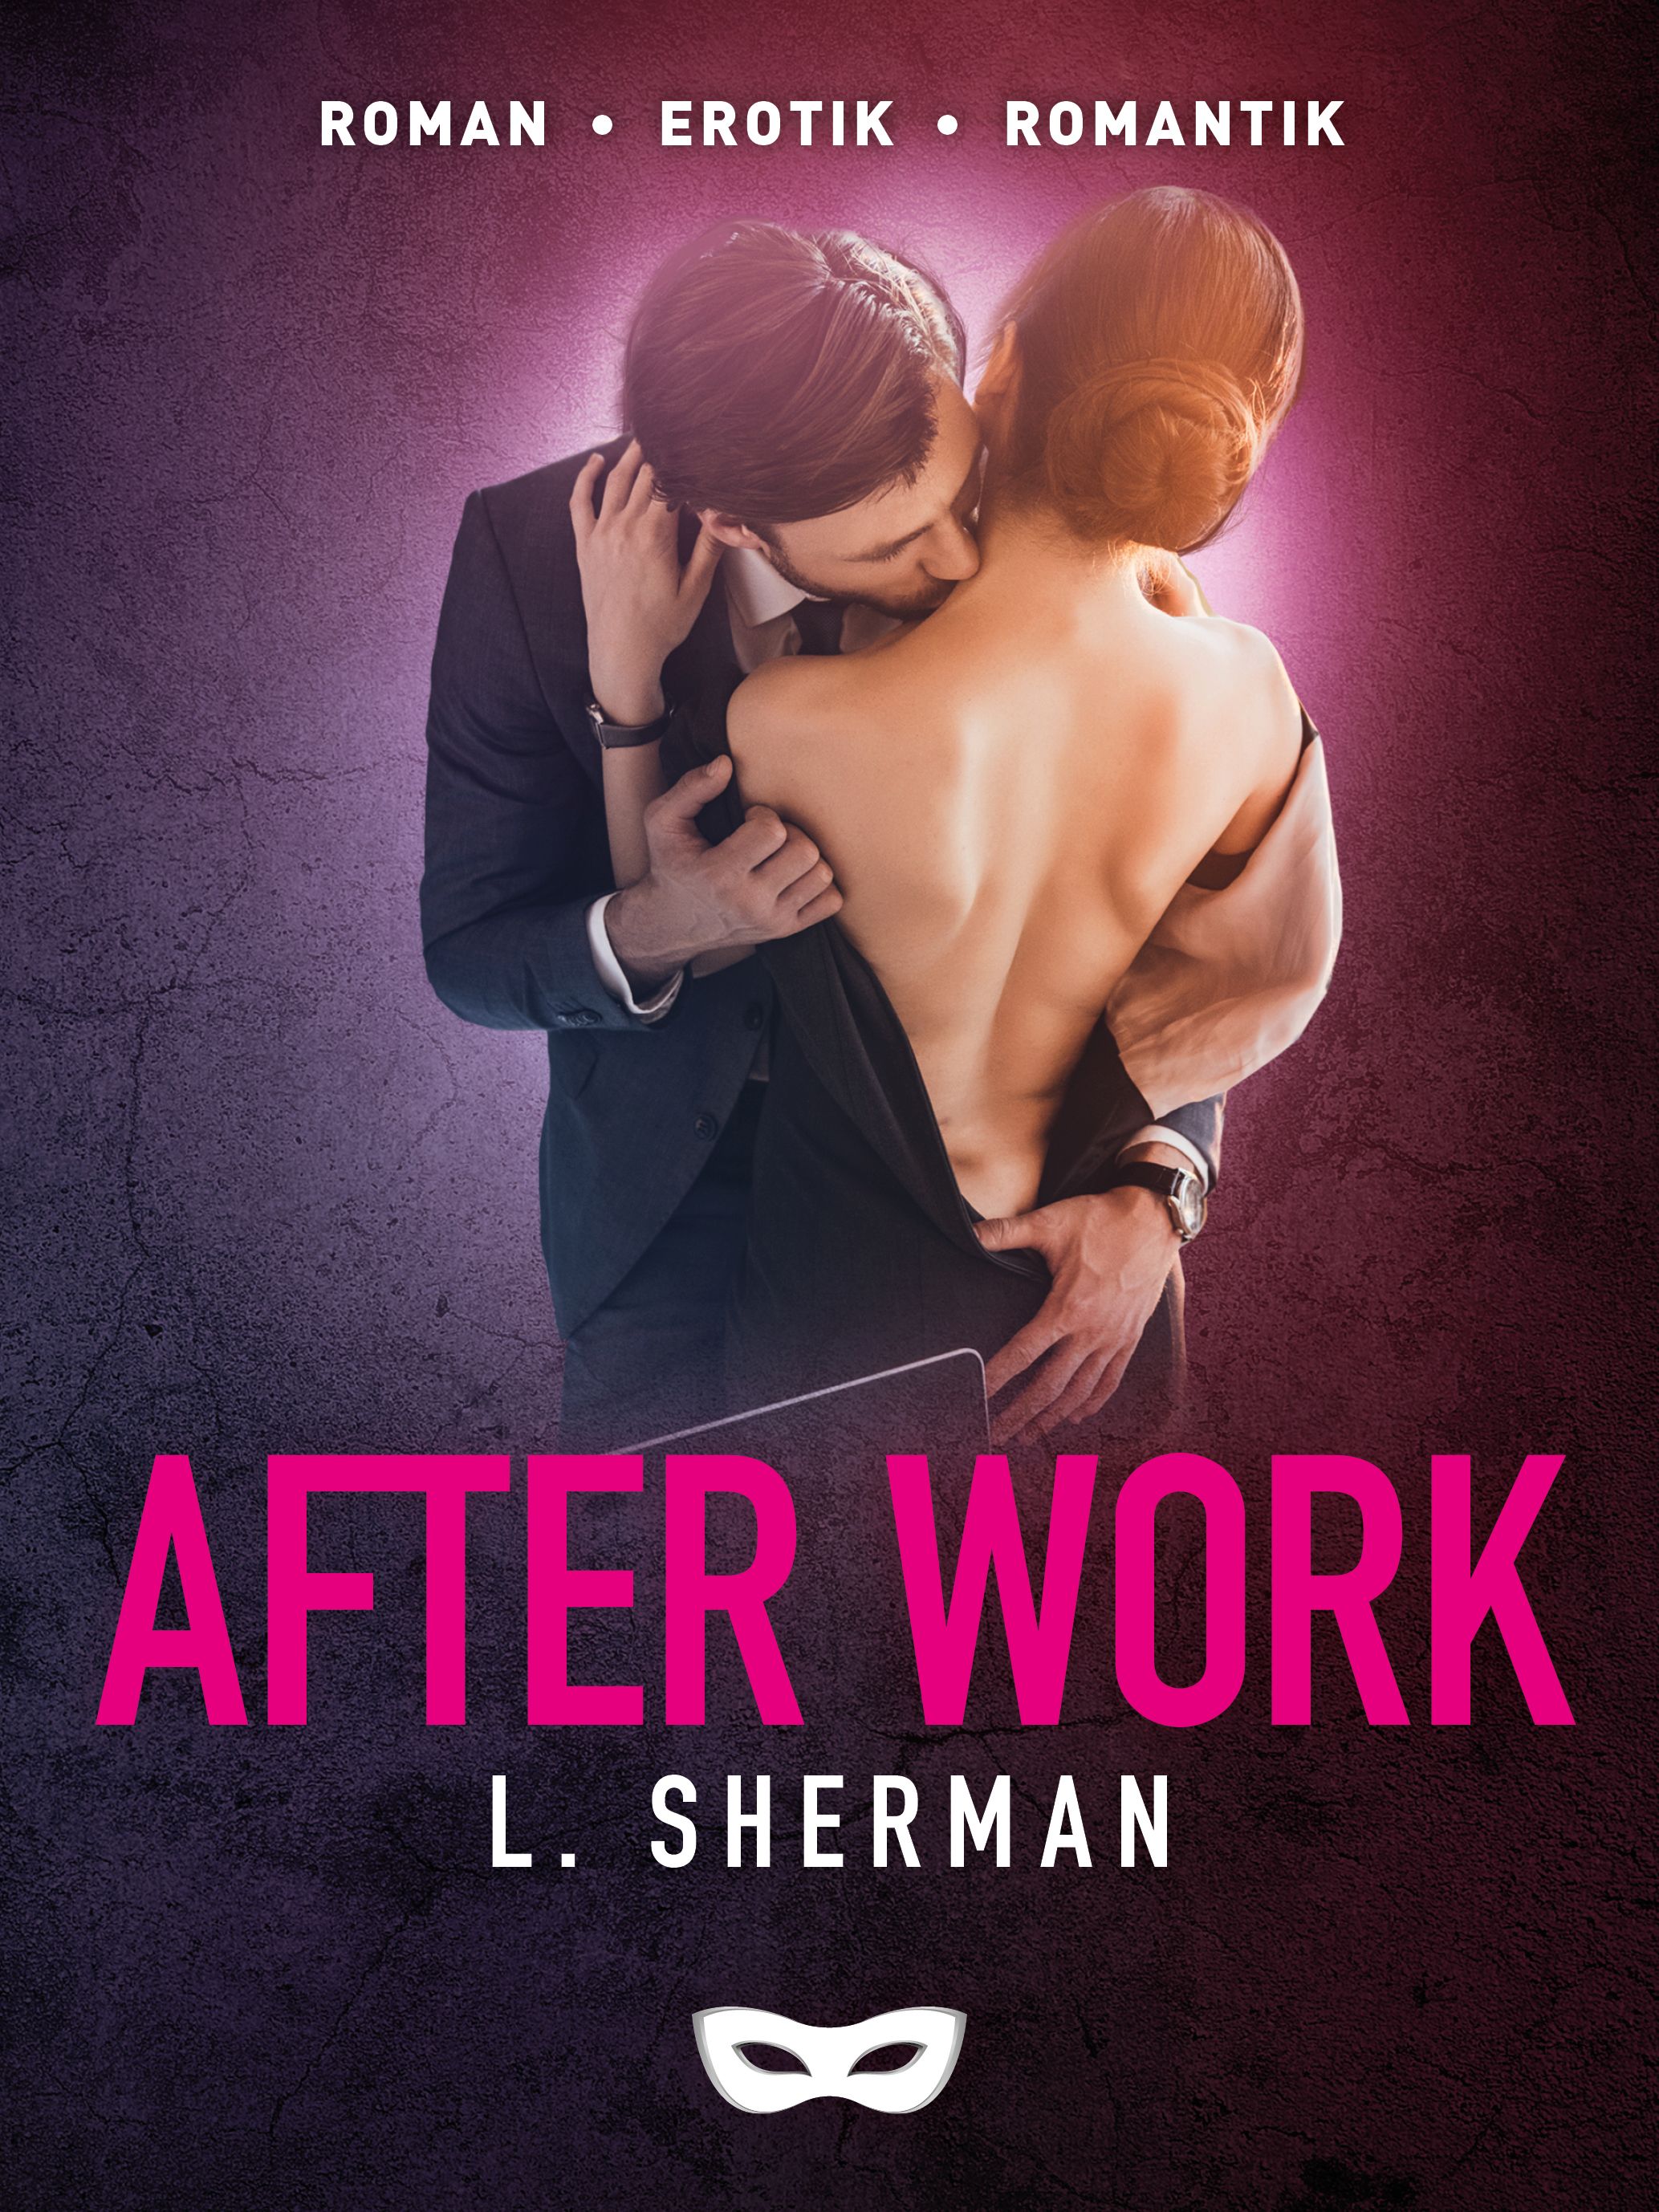 After work, eBook by L. Sherman